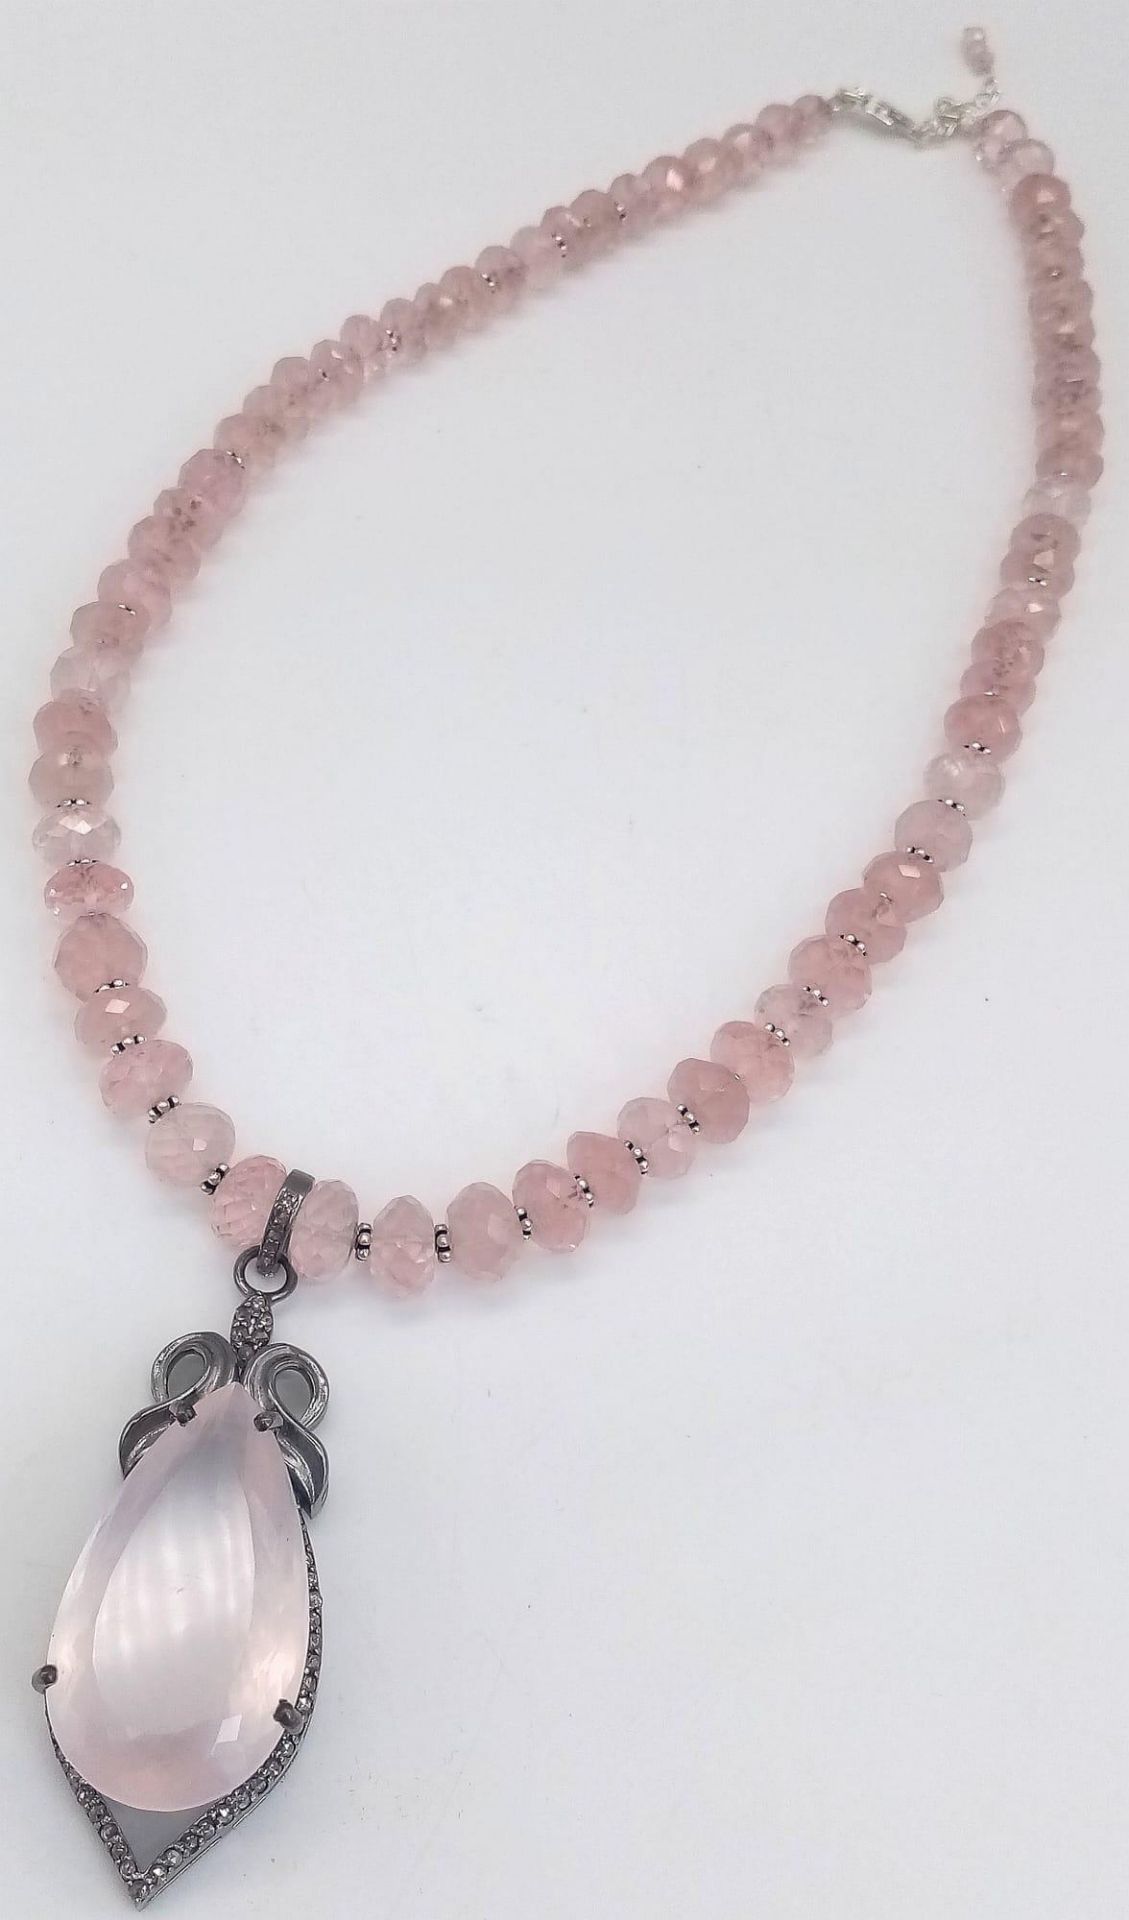 Rose Quartz Gemstone Necklace with Pendant with Diamonds on 925 Silver, The Pendant Comes with - Bild 2 aus 6